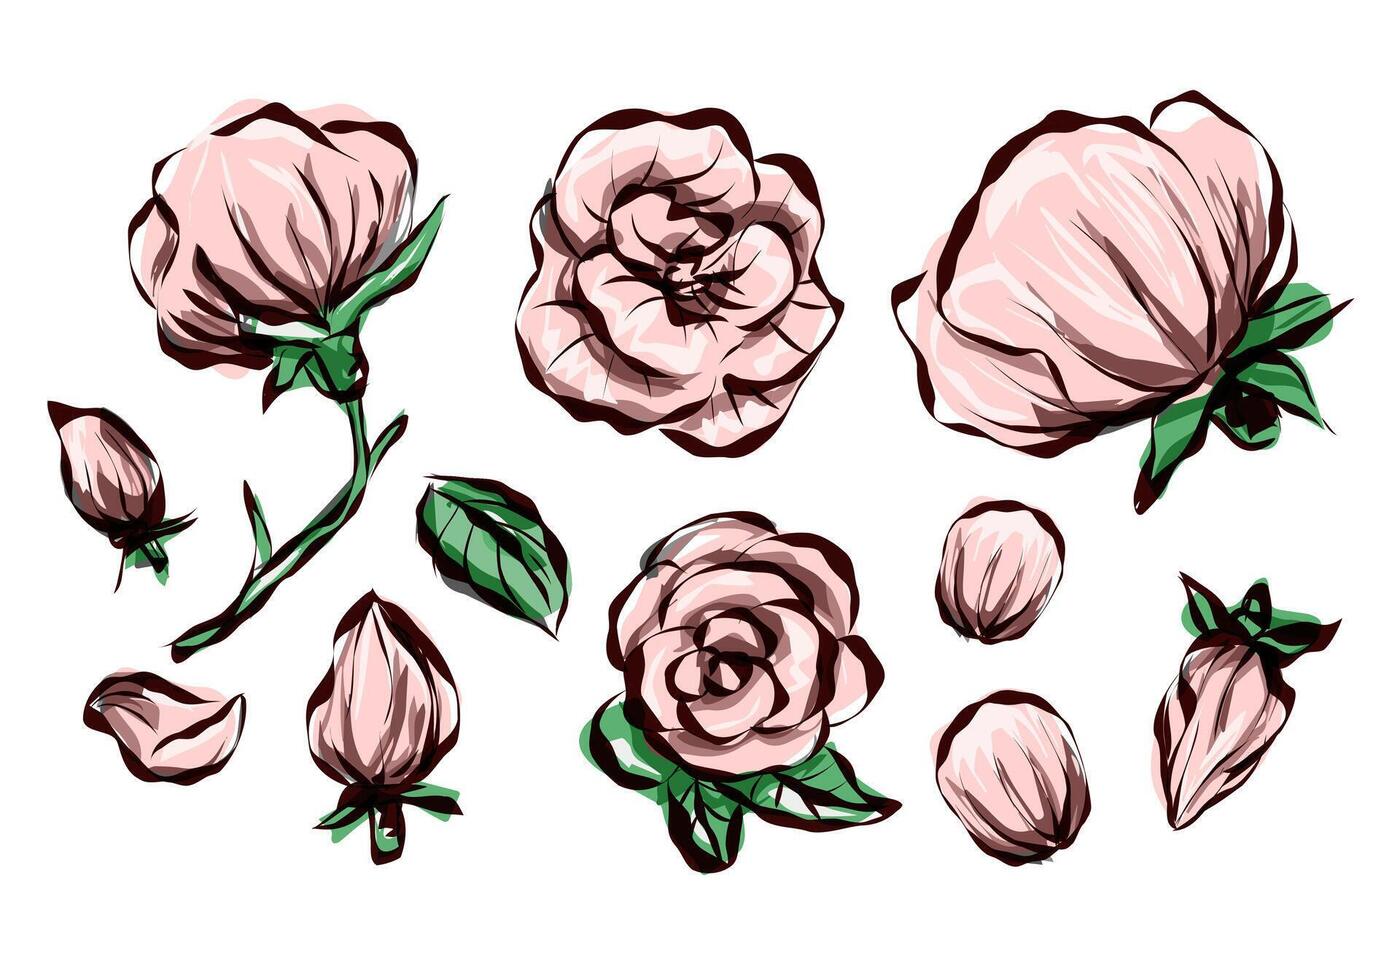 Vintage rose flowers on white background. Floral collection of cartoon vector detailed hand drawn roses. Vector illustration.